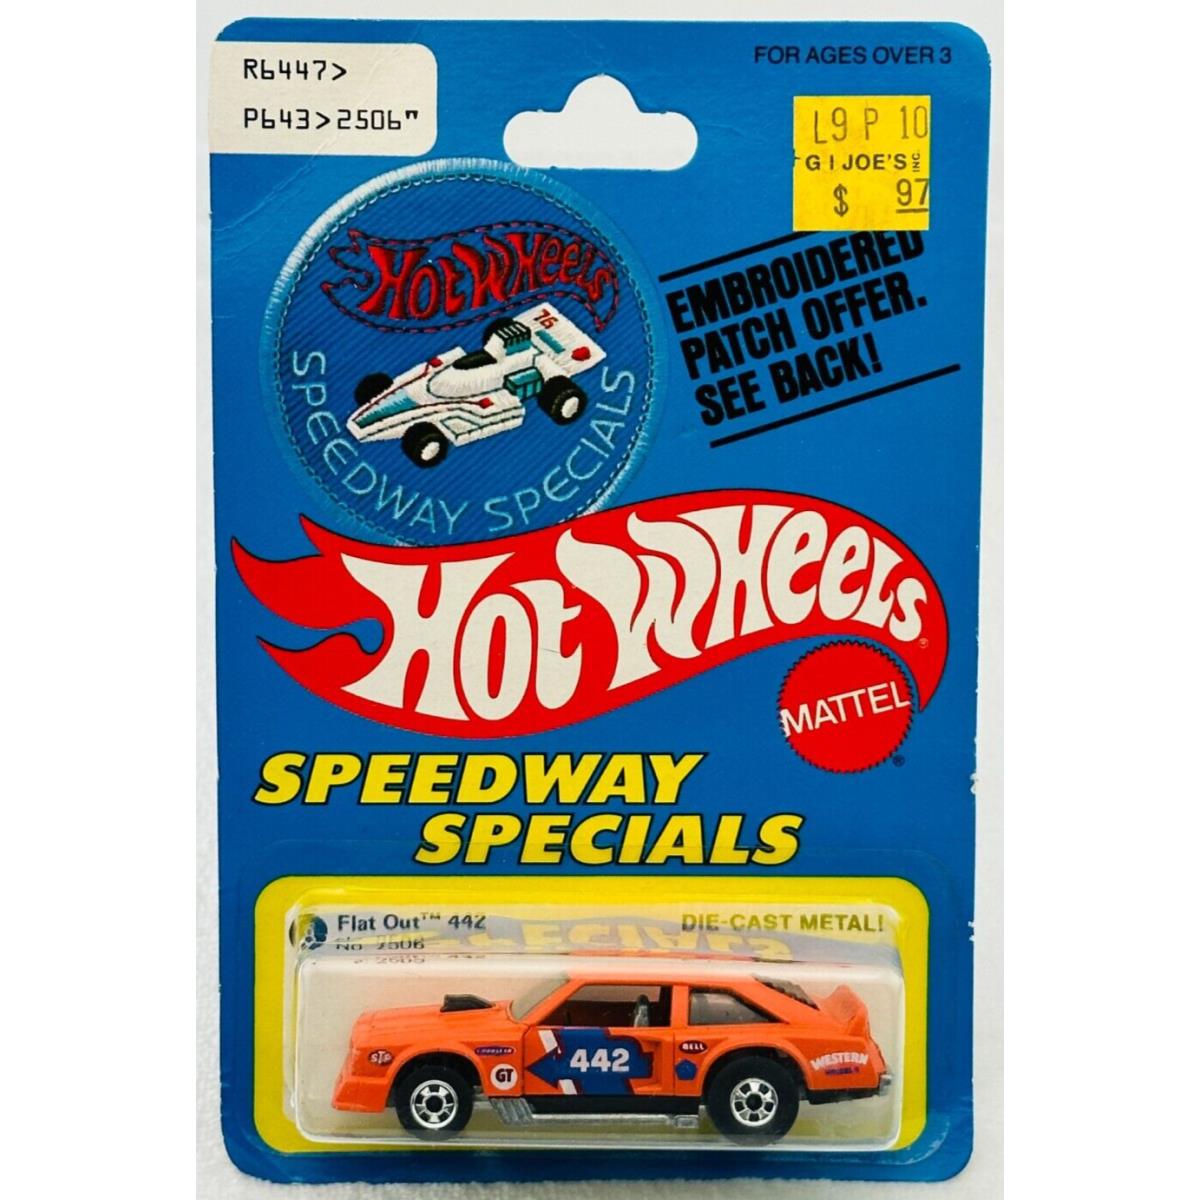 Hot Wheels Blackwall Flat Out 442 Speedway Specials 2506 Patch Card in Blister